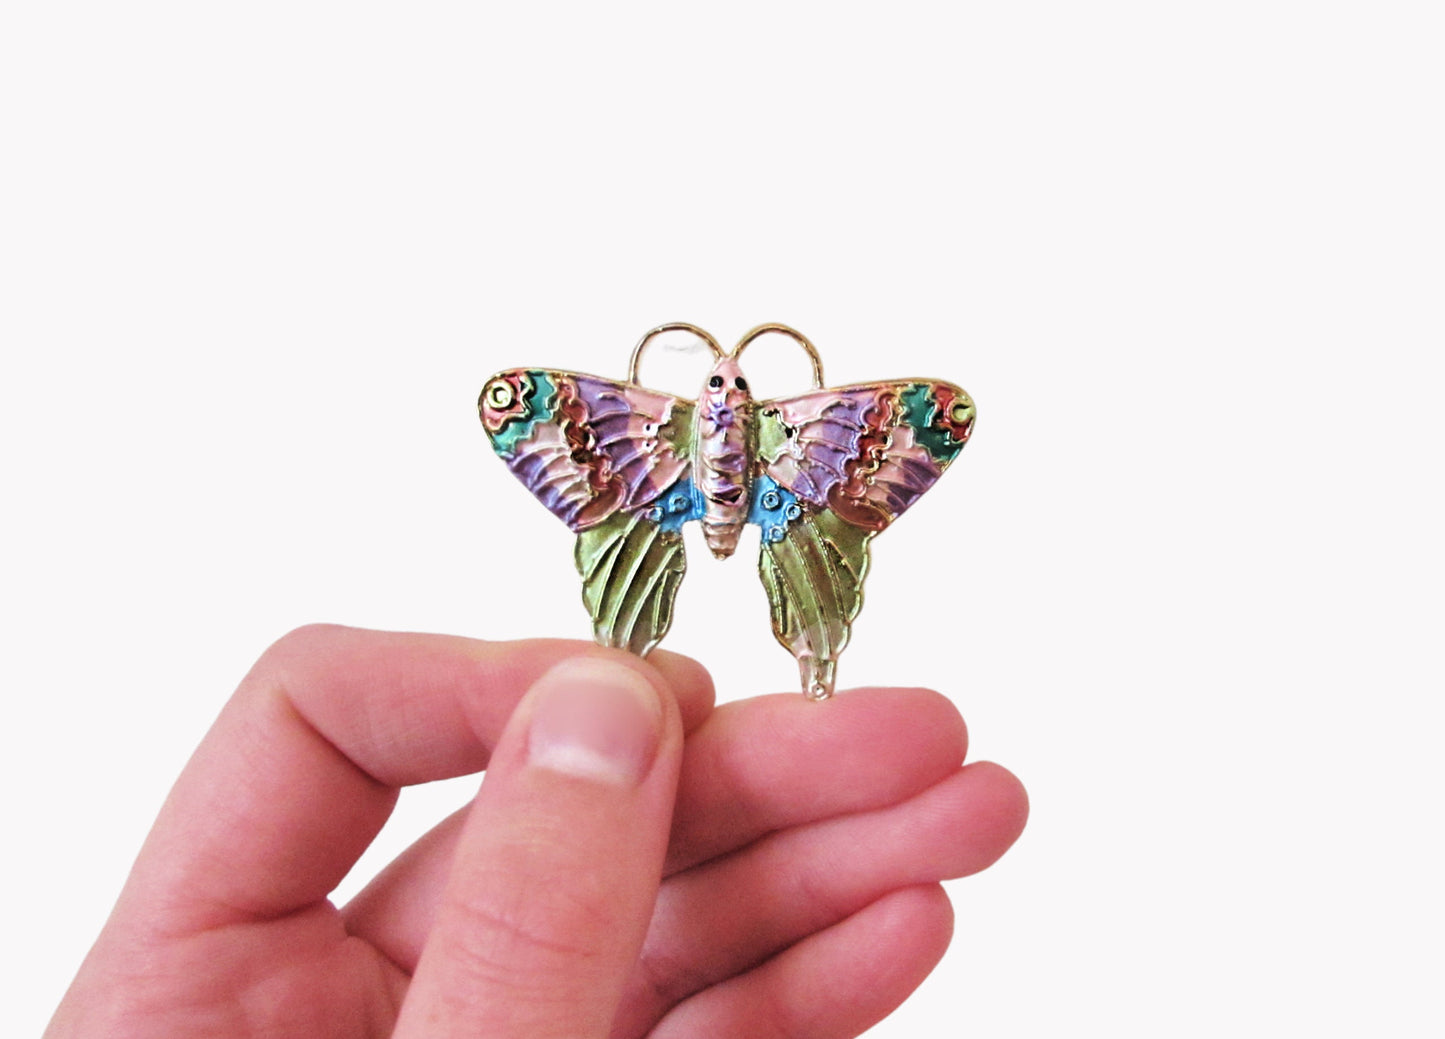 Vintage Butterfly Brooch, Colorful Enamel Butterfly Pin, Pink Purple Green Blue and Gold Tone Butterfly Accessory, VTG Rainbow Accessories